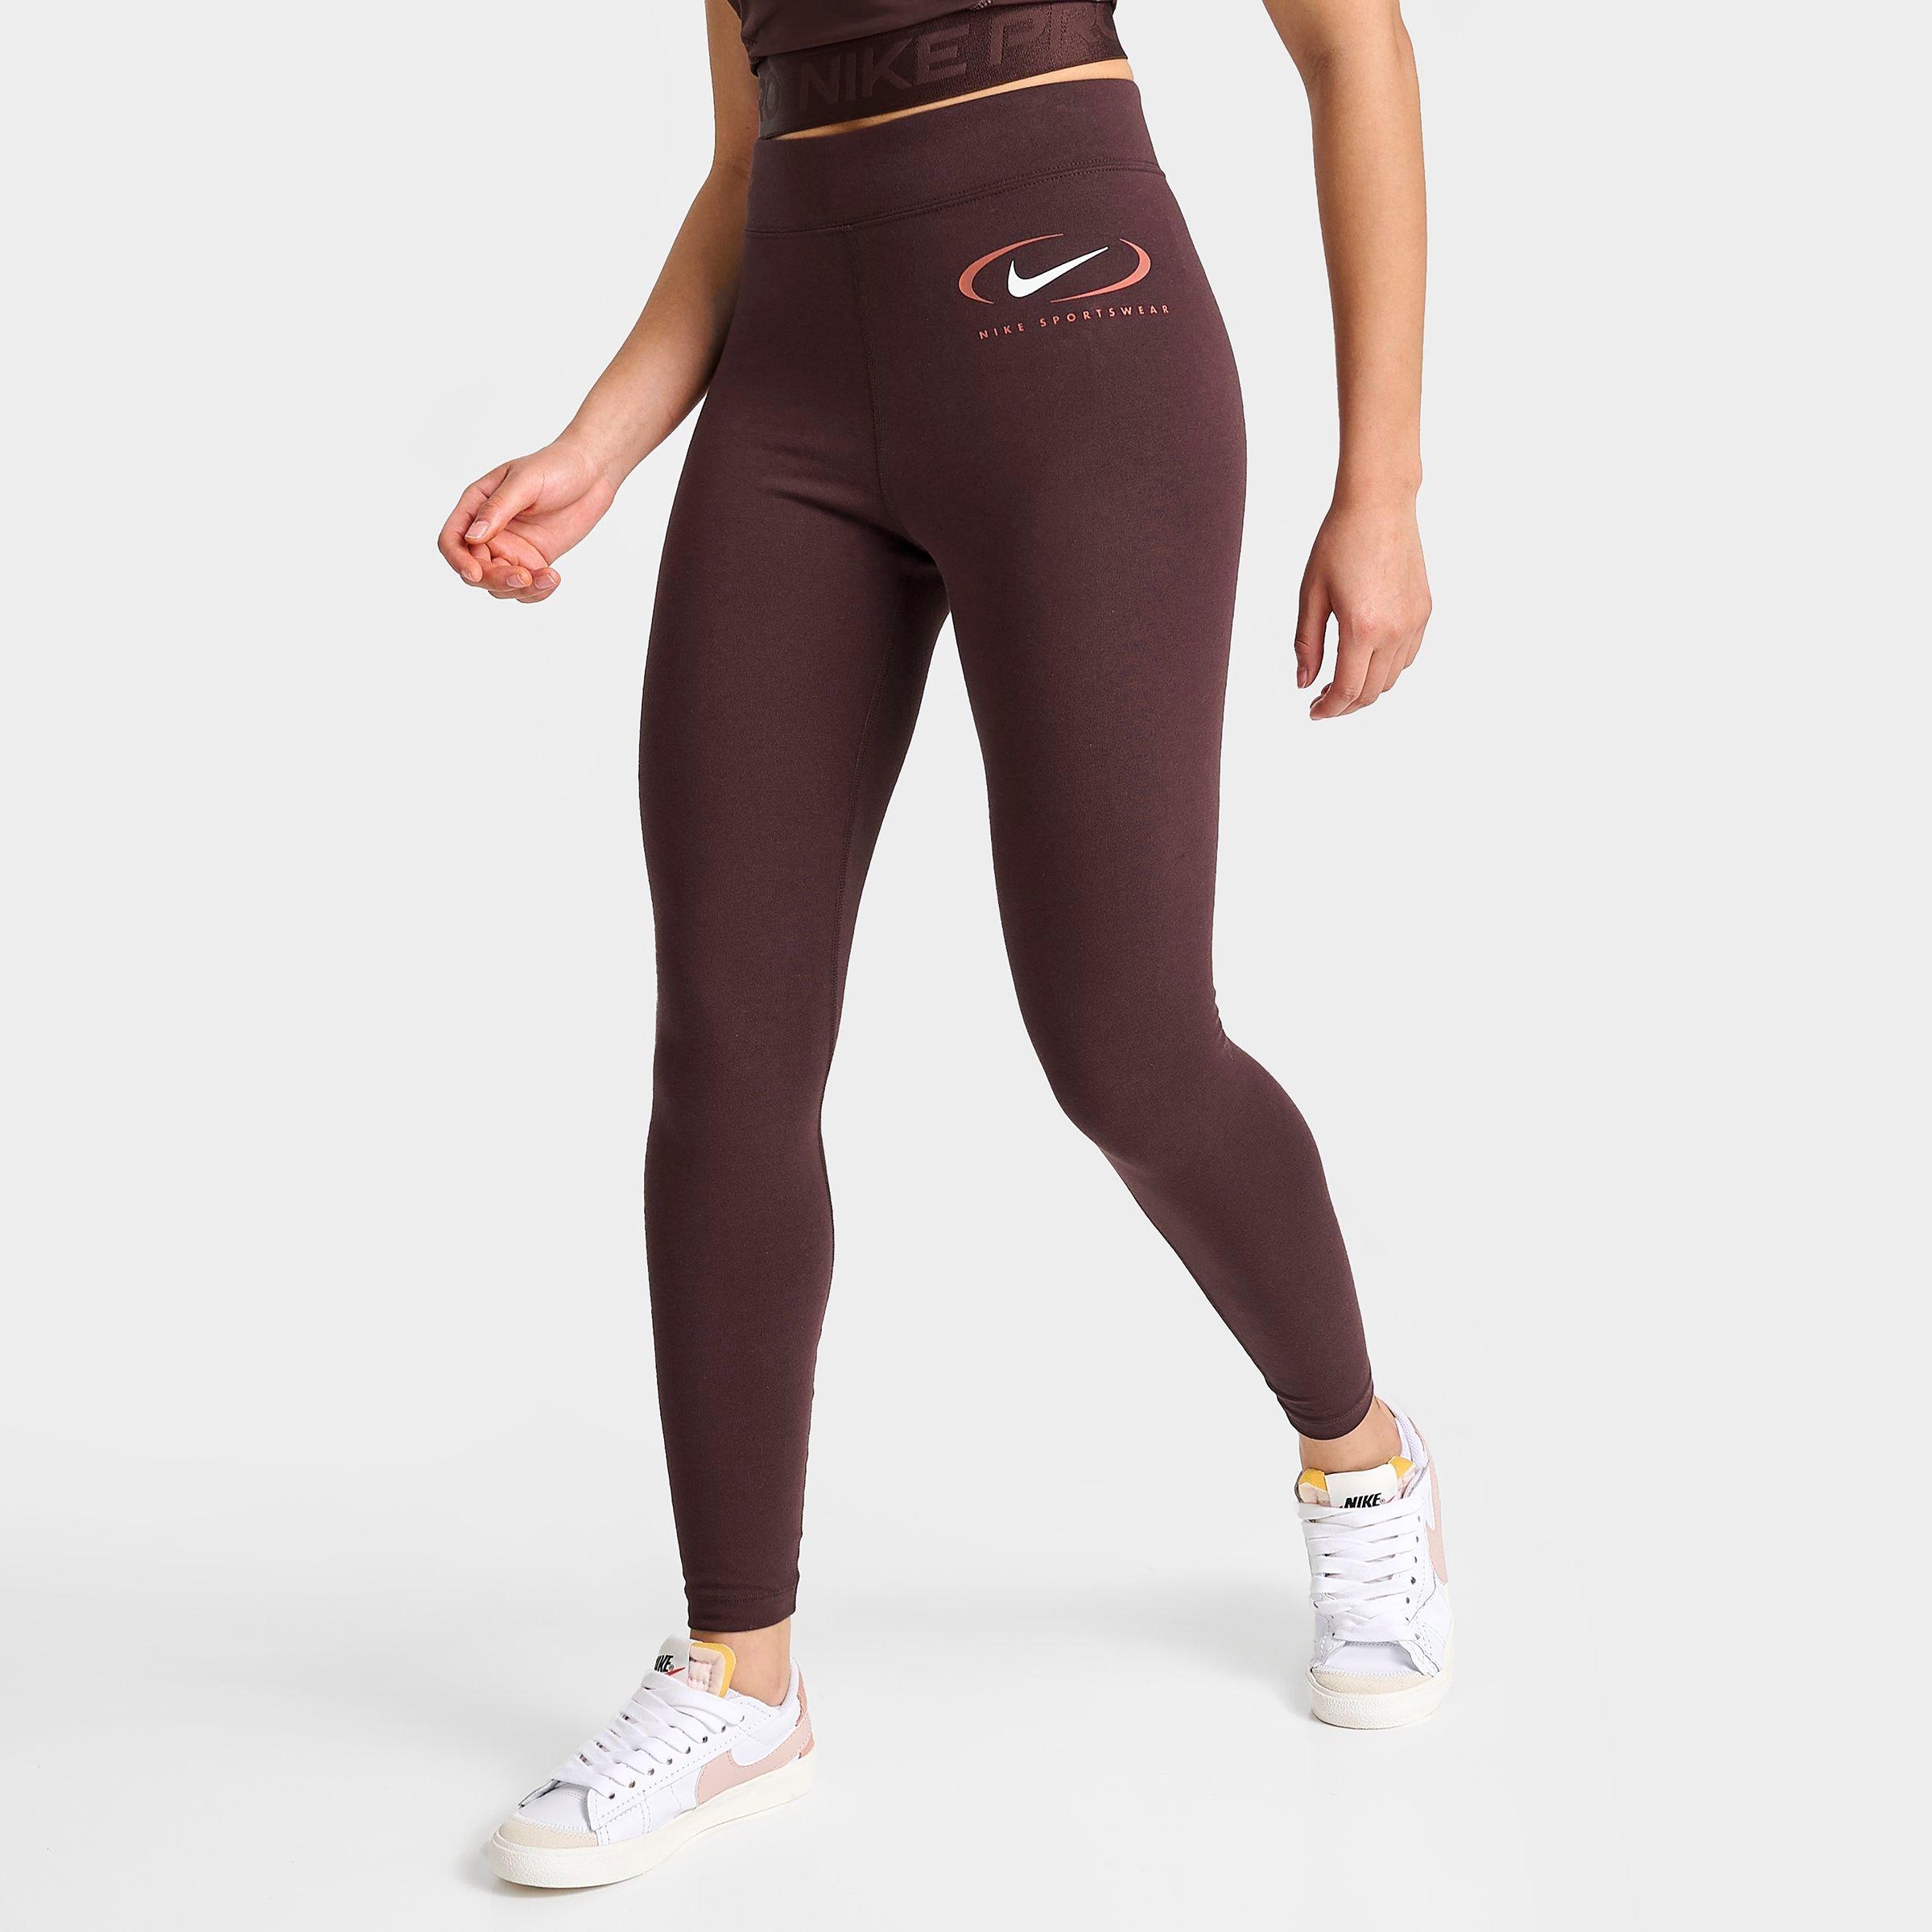 PE NATION Without Limits Legging Black/Maroon